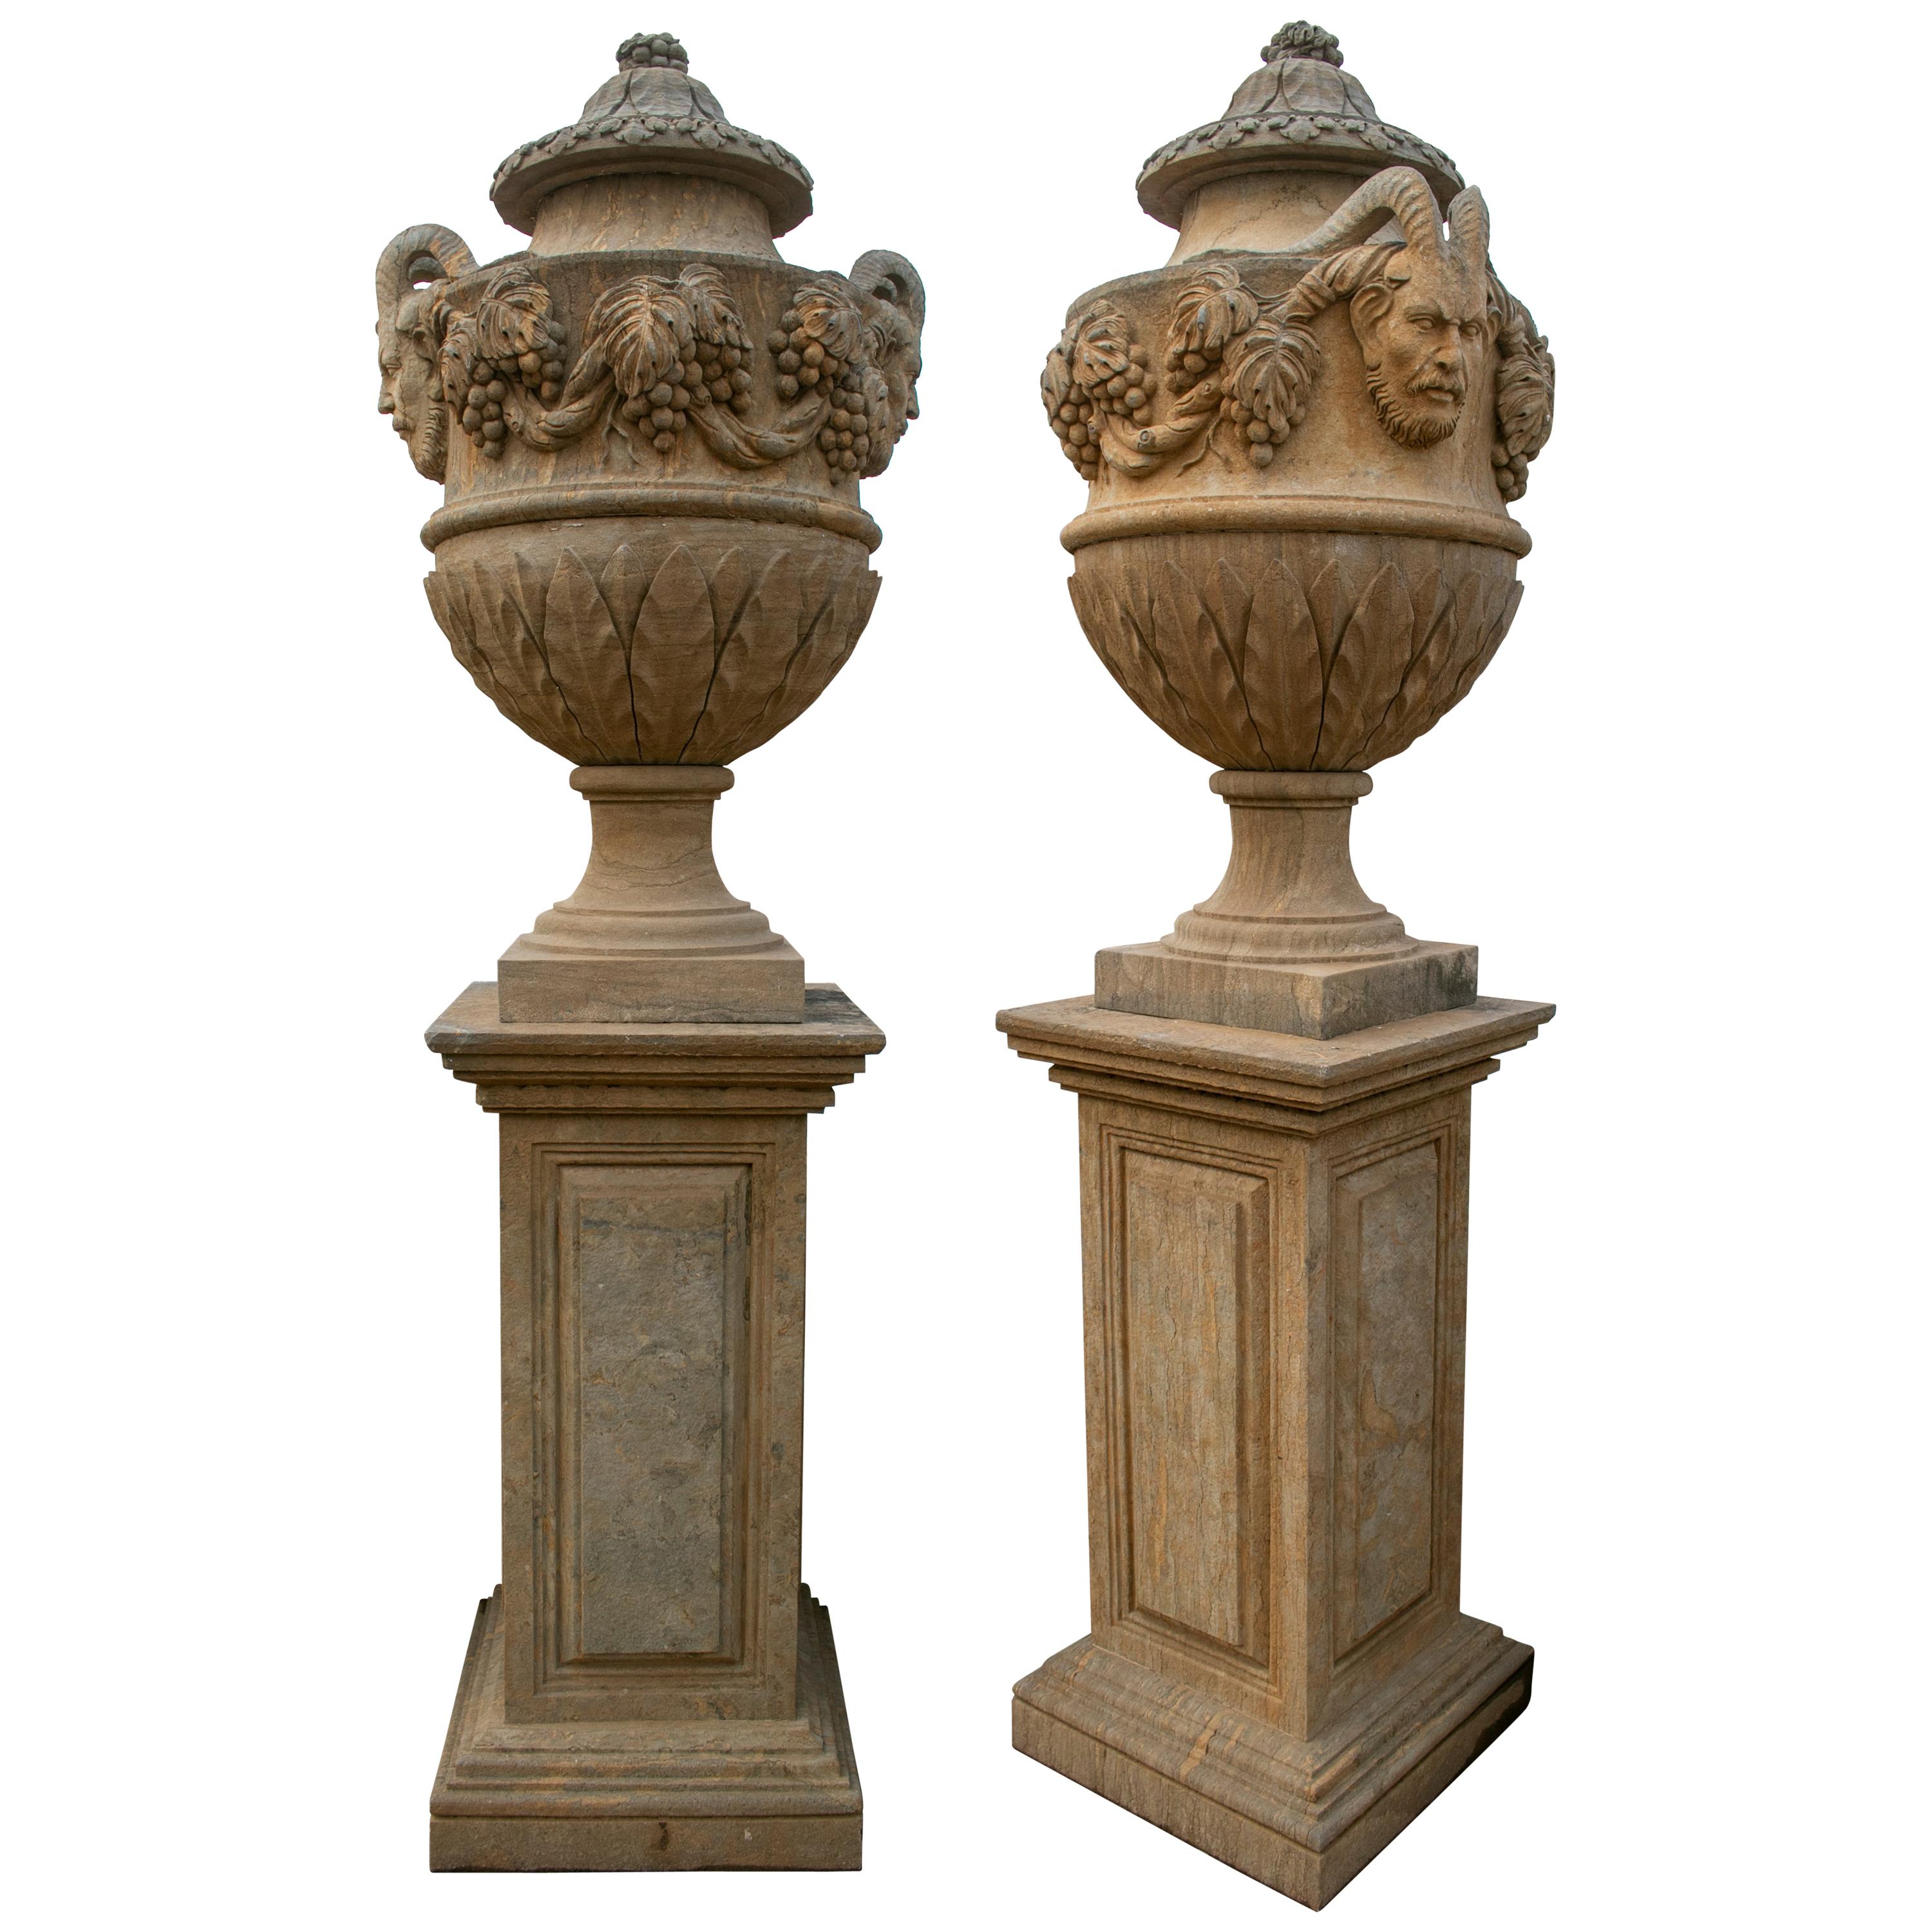 Pair of Hand Carved Marble Urns on Pedestals with Antique Patina